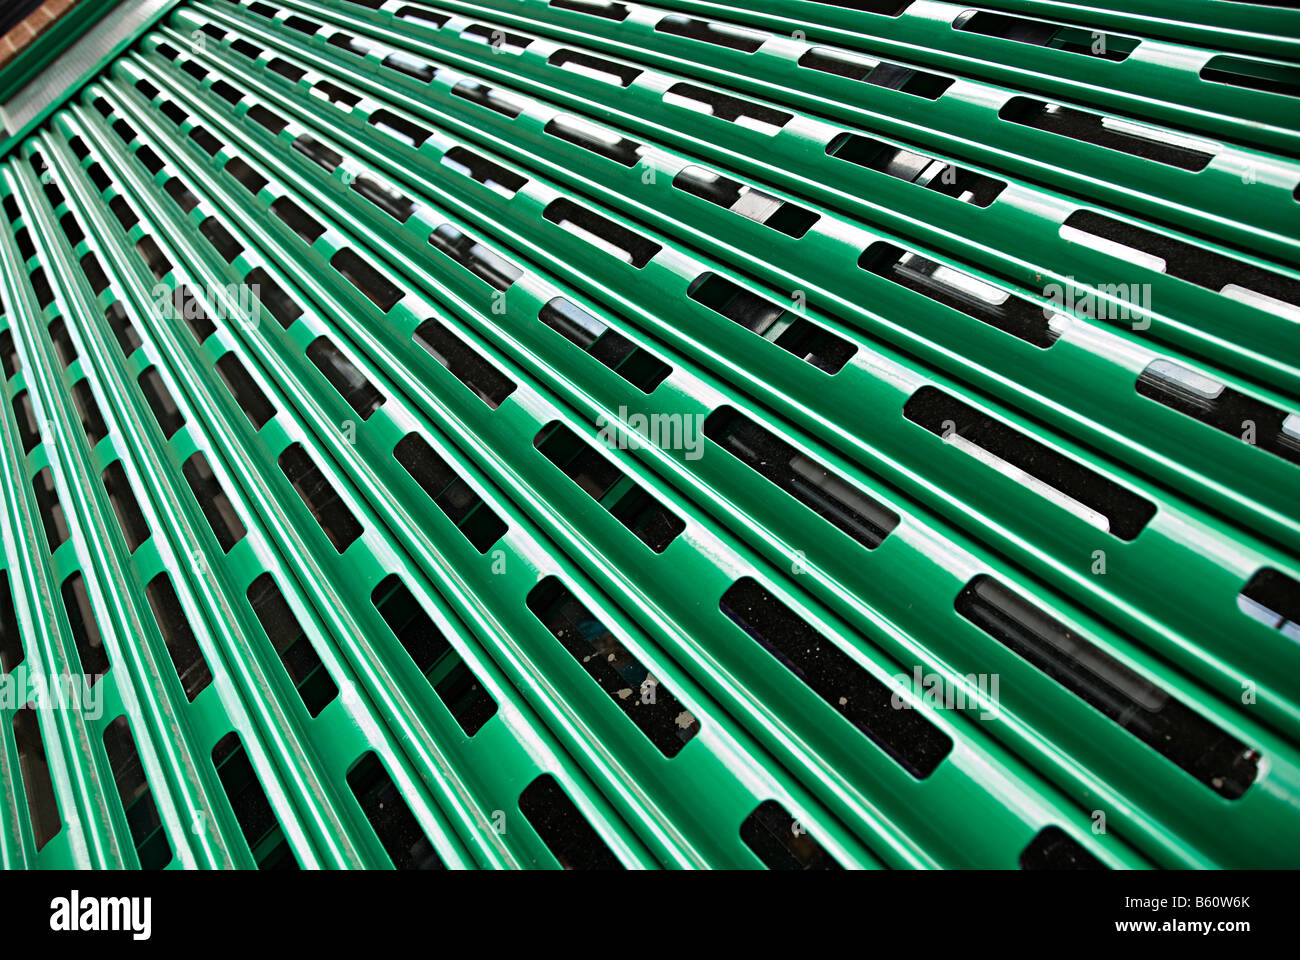 green shutters on a shop front to stop people breaking in Stock Photo